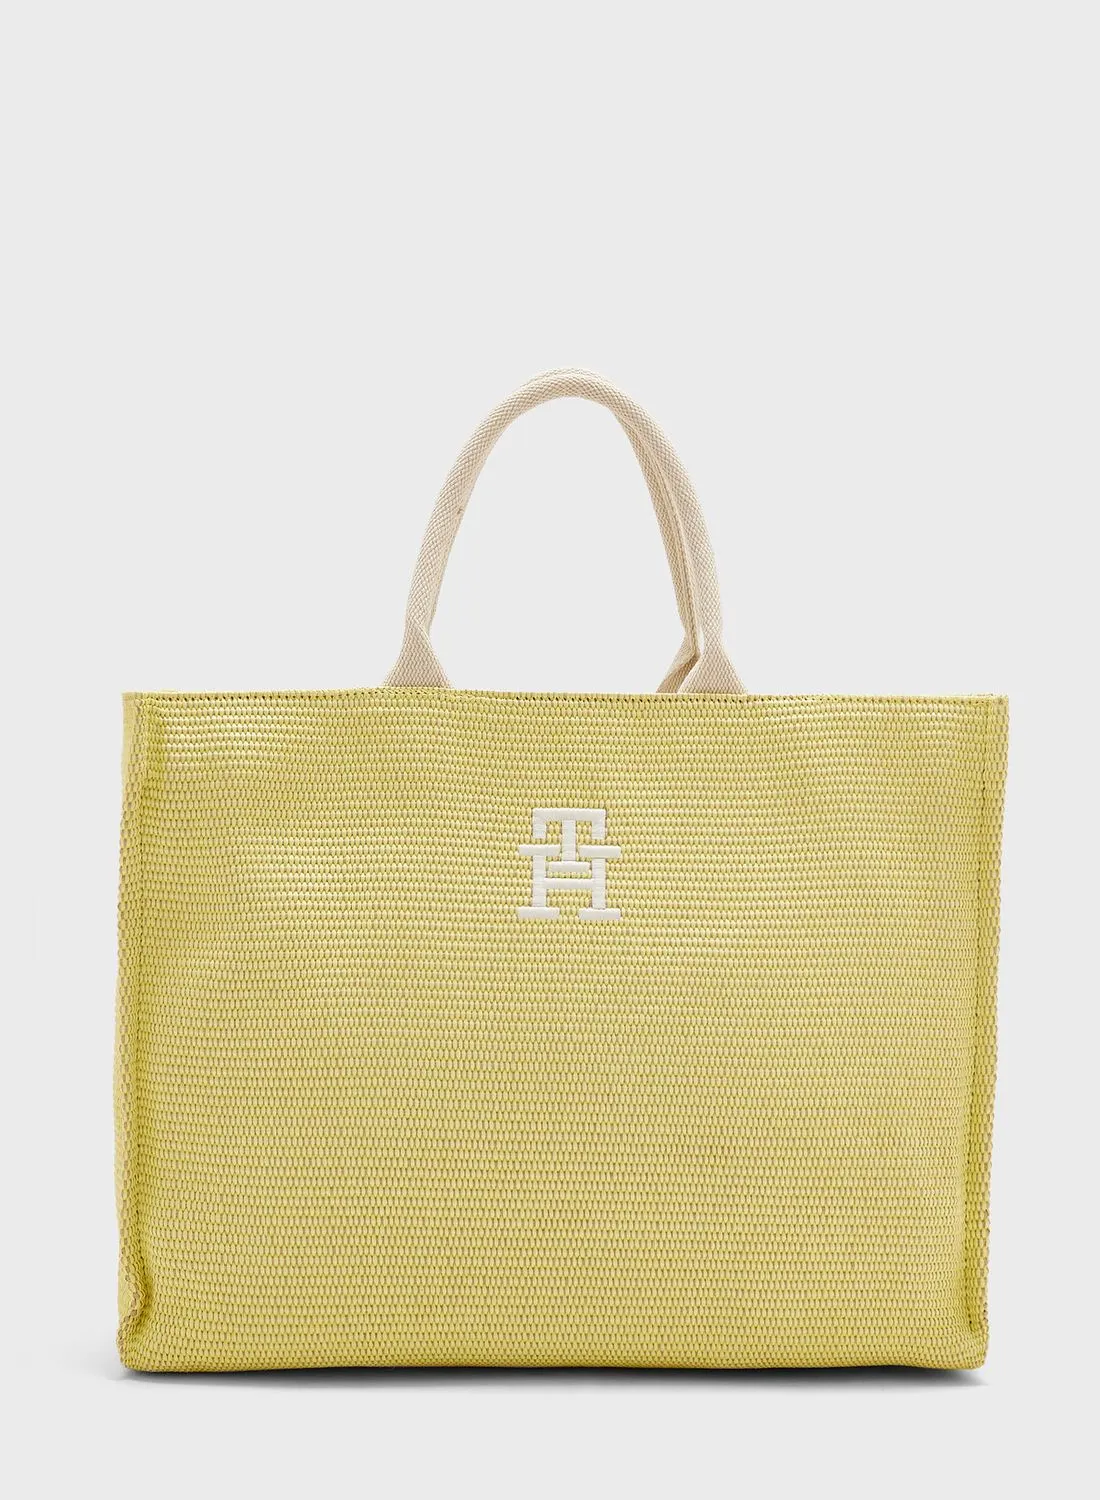 TOMMY HILFIGER Beach Tote